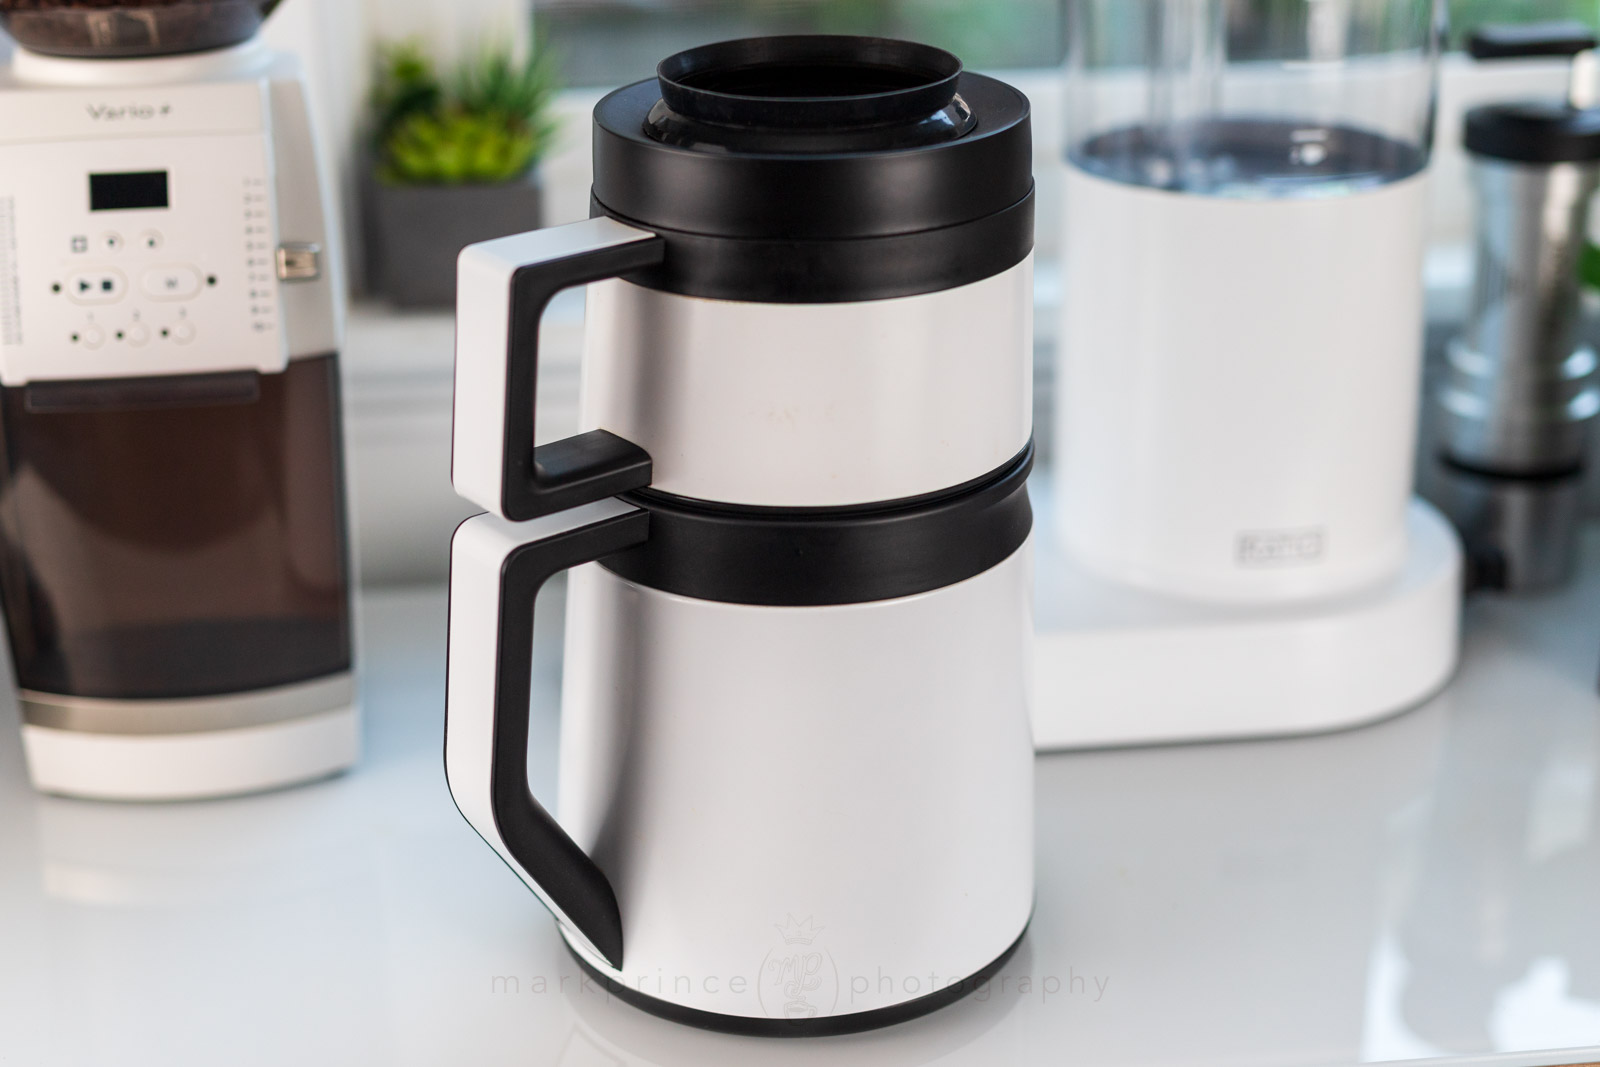 The Ratio Six Coffee Maker Receives the SCA Certified Home Brewer